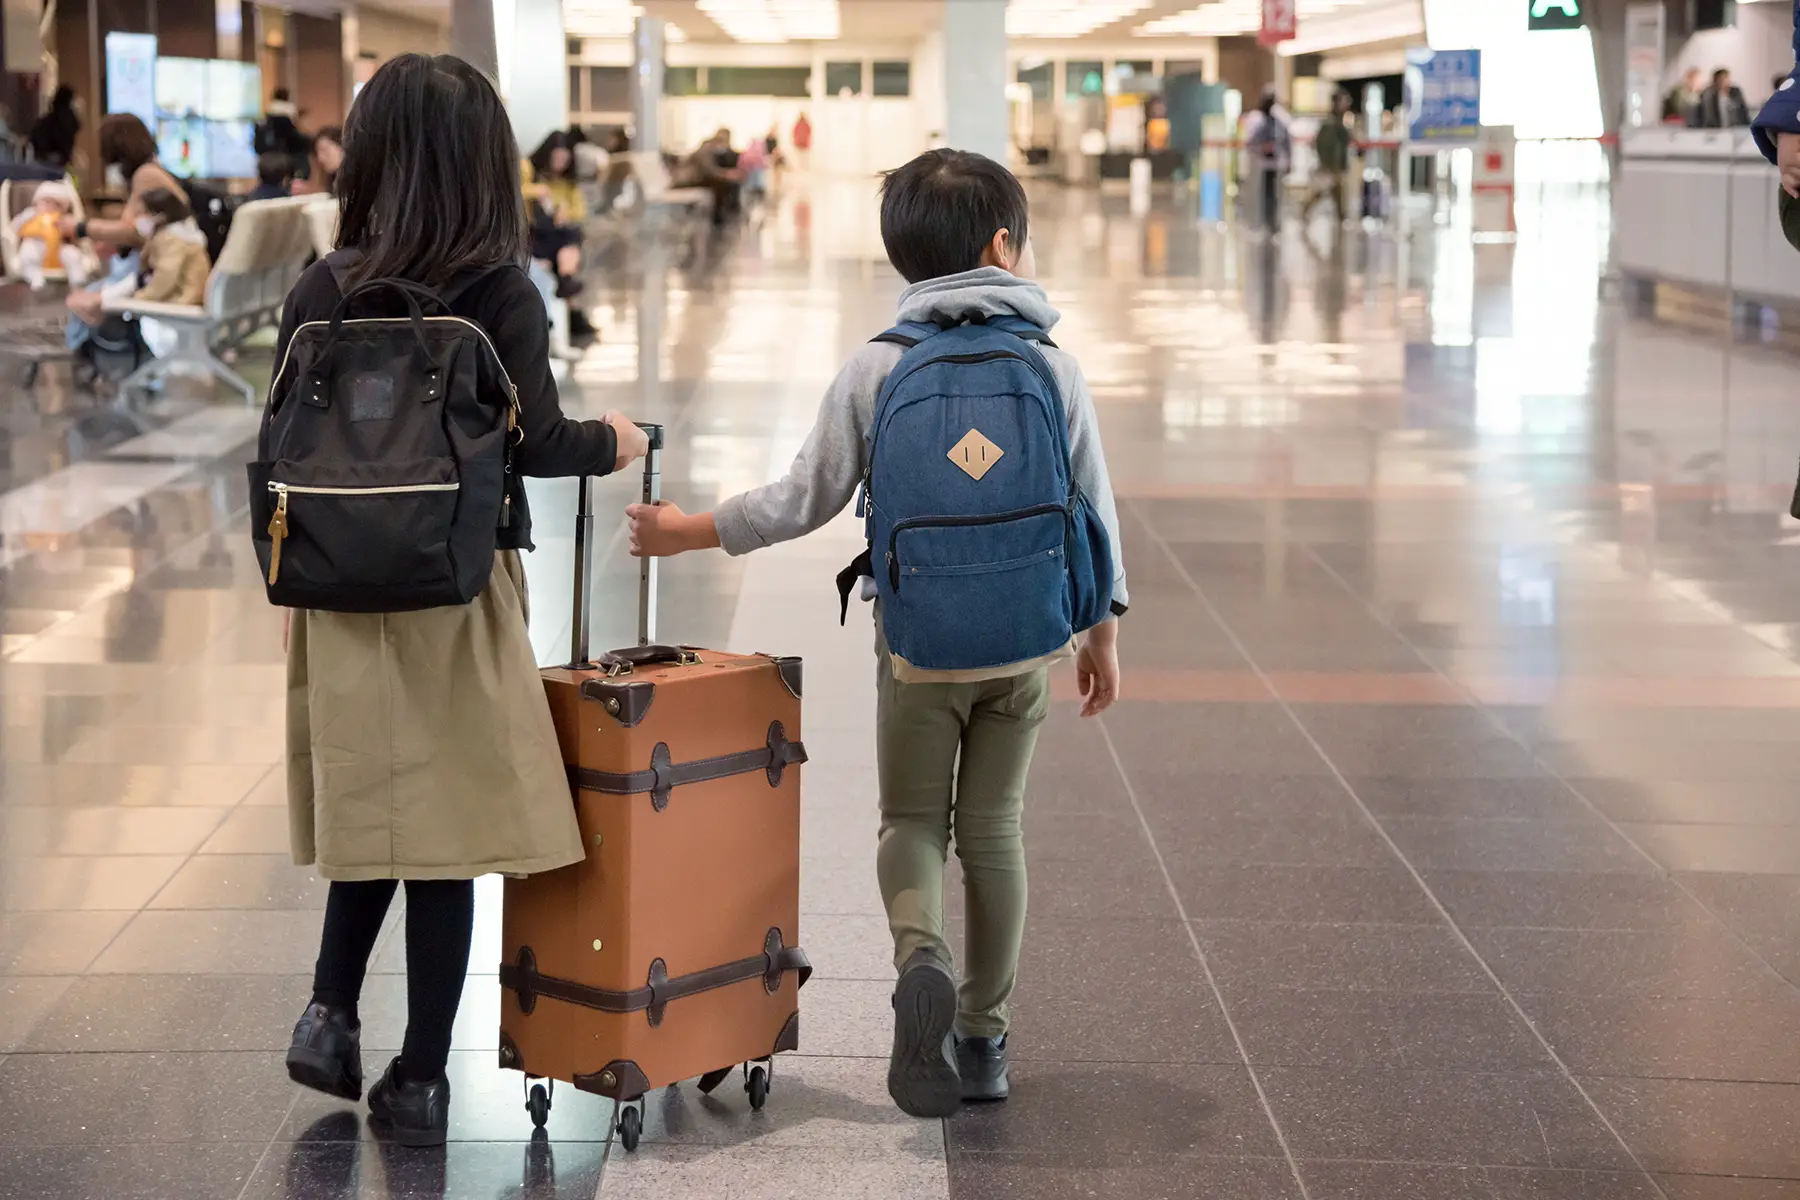 Siblings (brother and sister) walking around an airport with their luggage